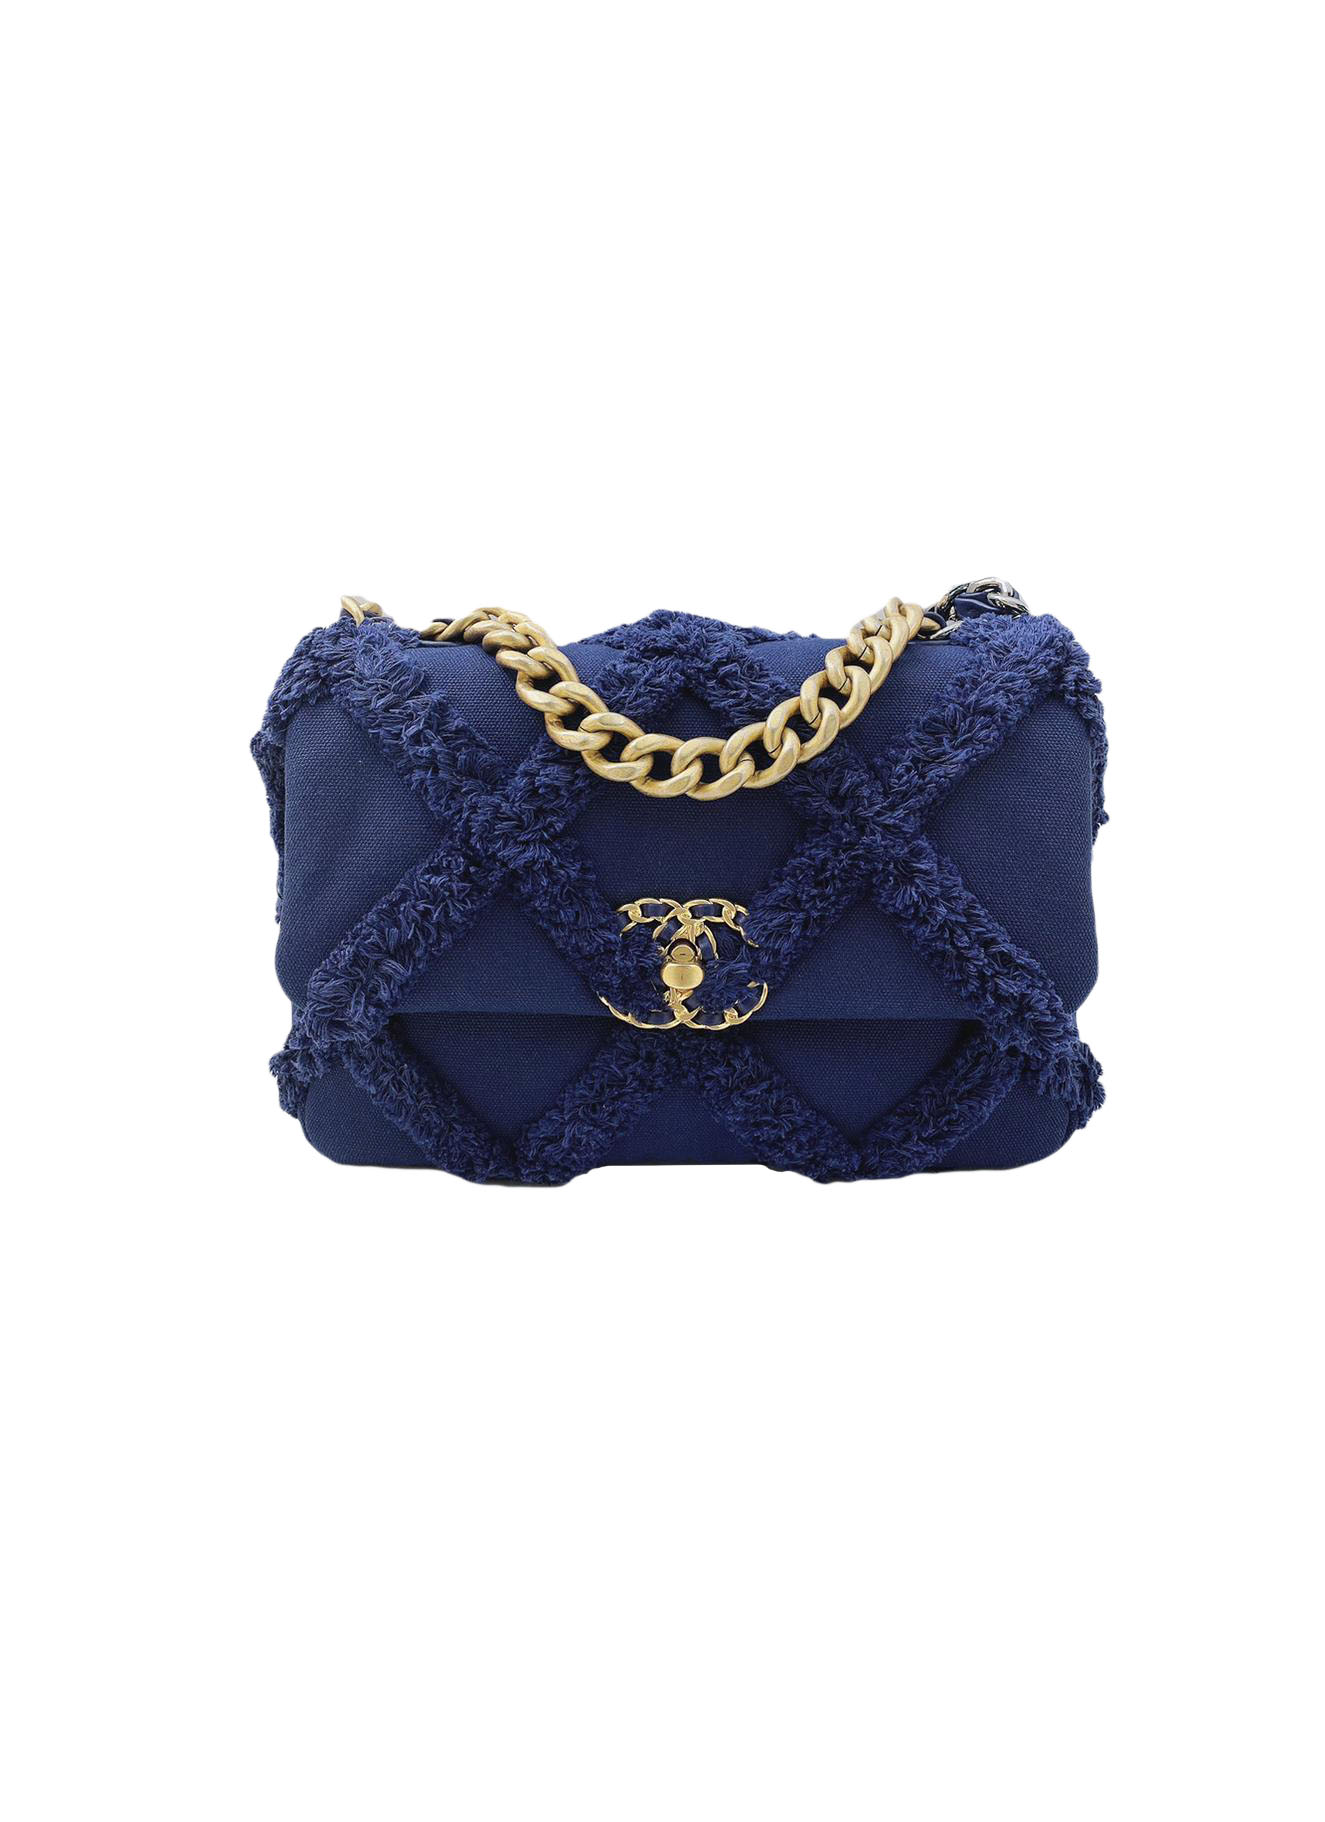 BLUE COTTON CANVAS QUILTED MEDIUM CHANEL 19 FLAP BAG - styleforless